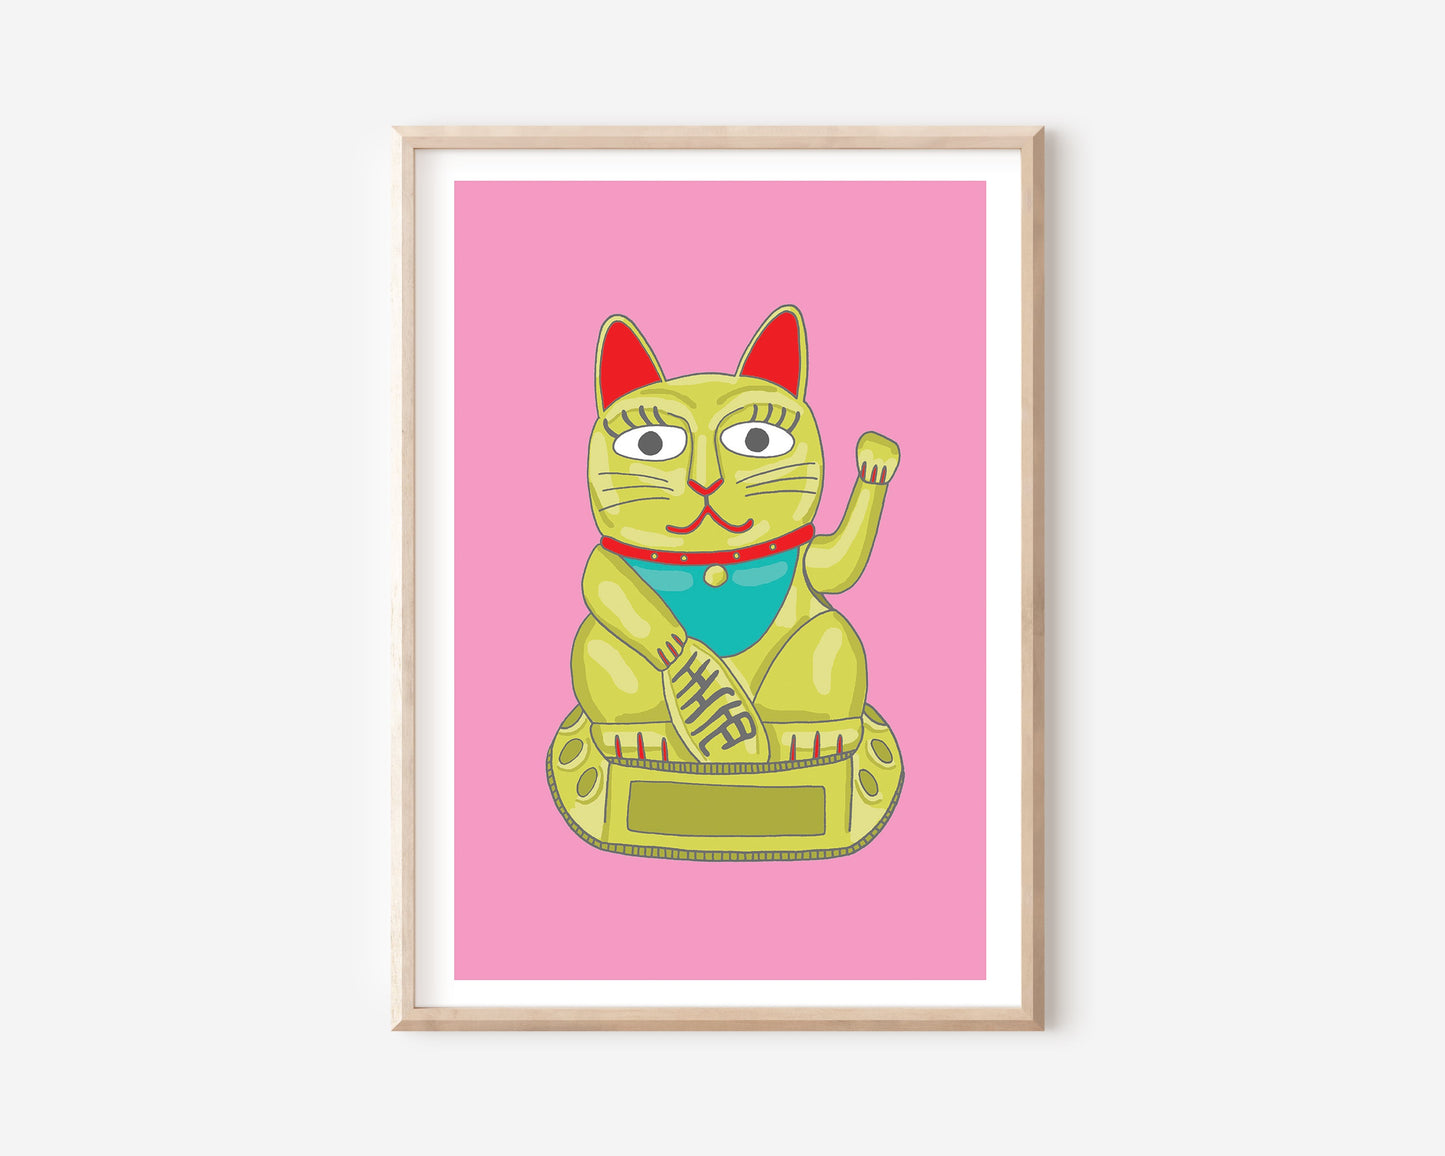 An A4 print with a lucky cat illustration